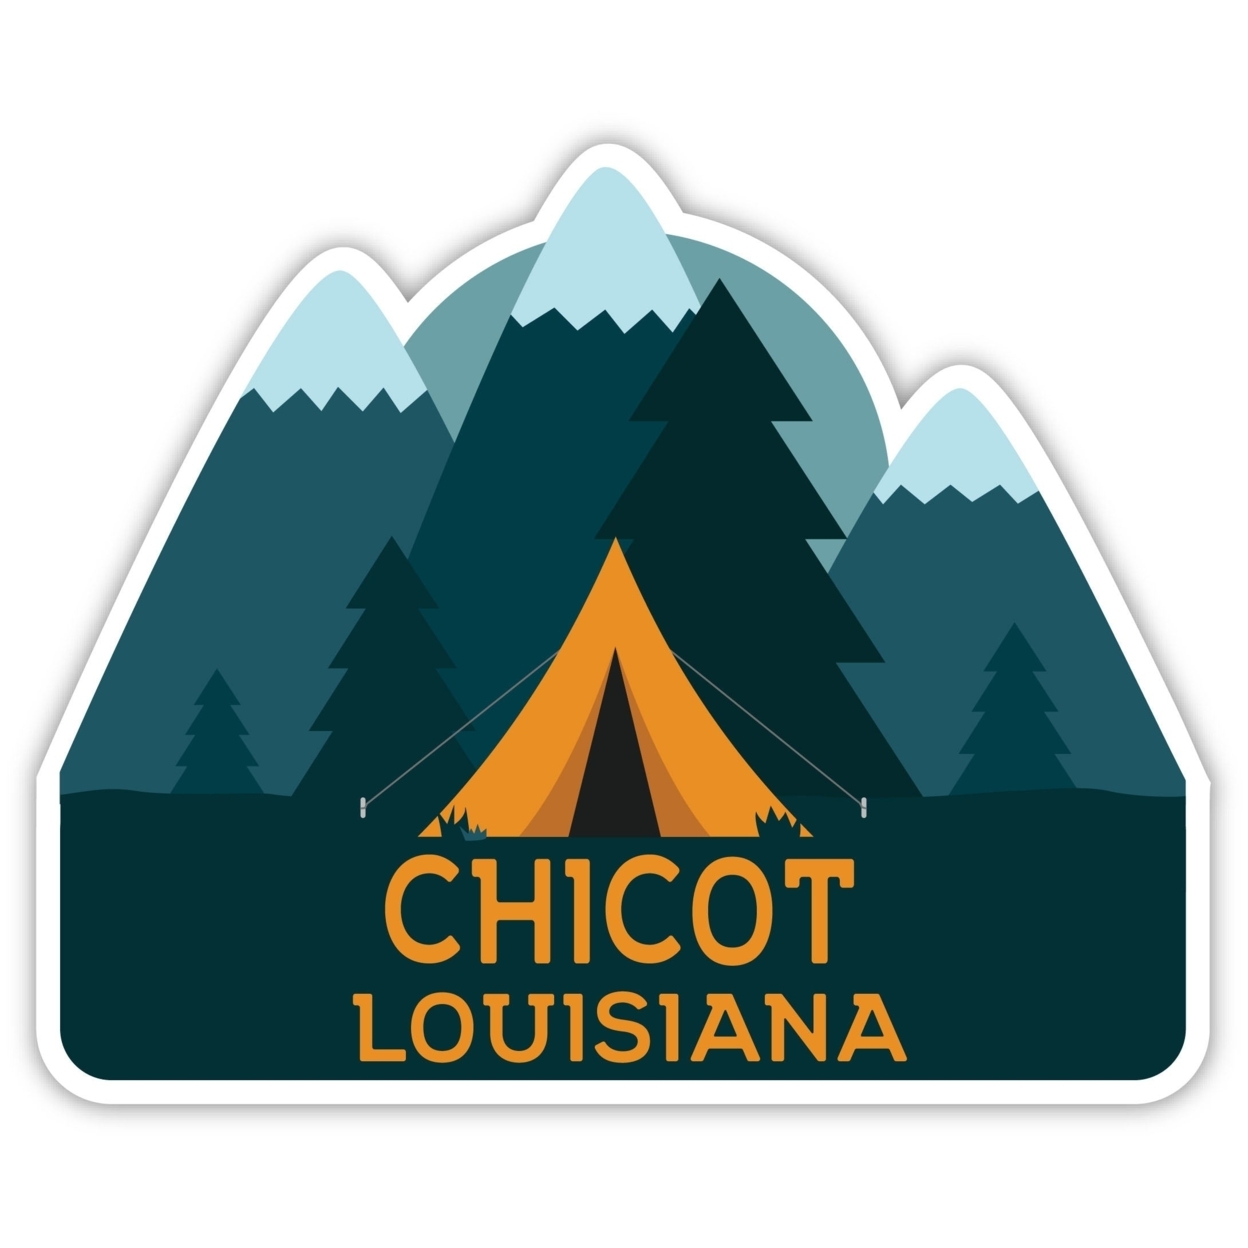 Chicot Louisiana Souvenir Decorative Stickers (Choose Theme And Size) - 4-Pack, 2-Inch, Tent